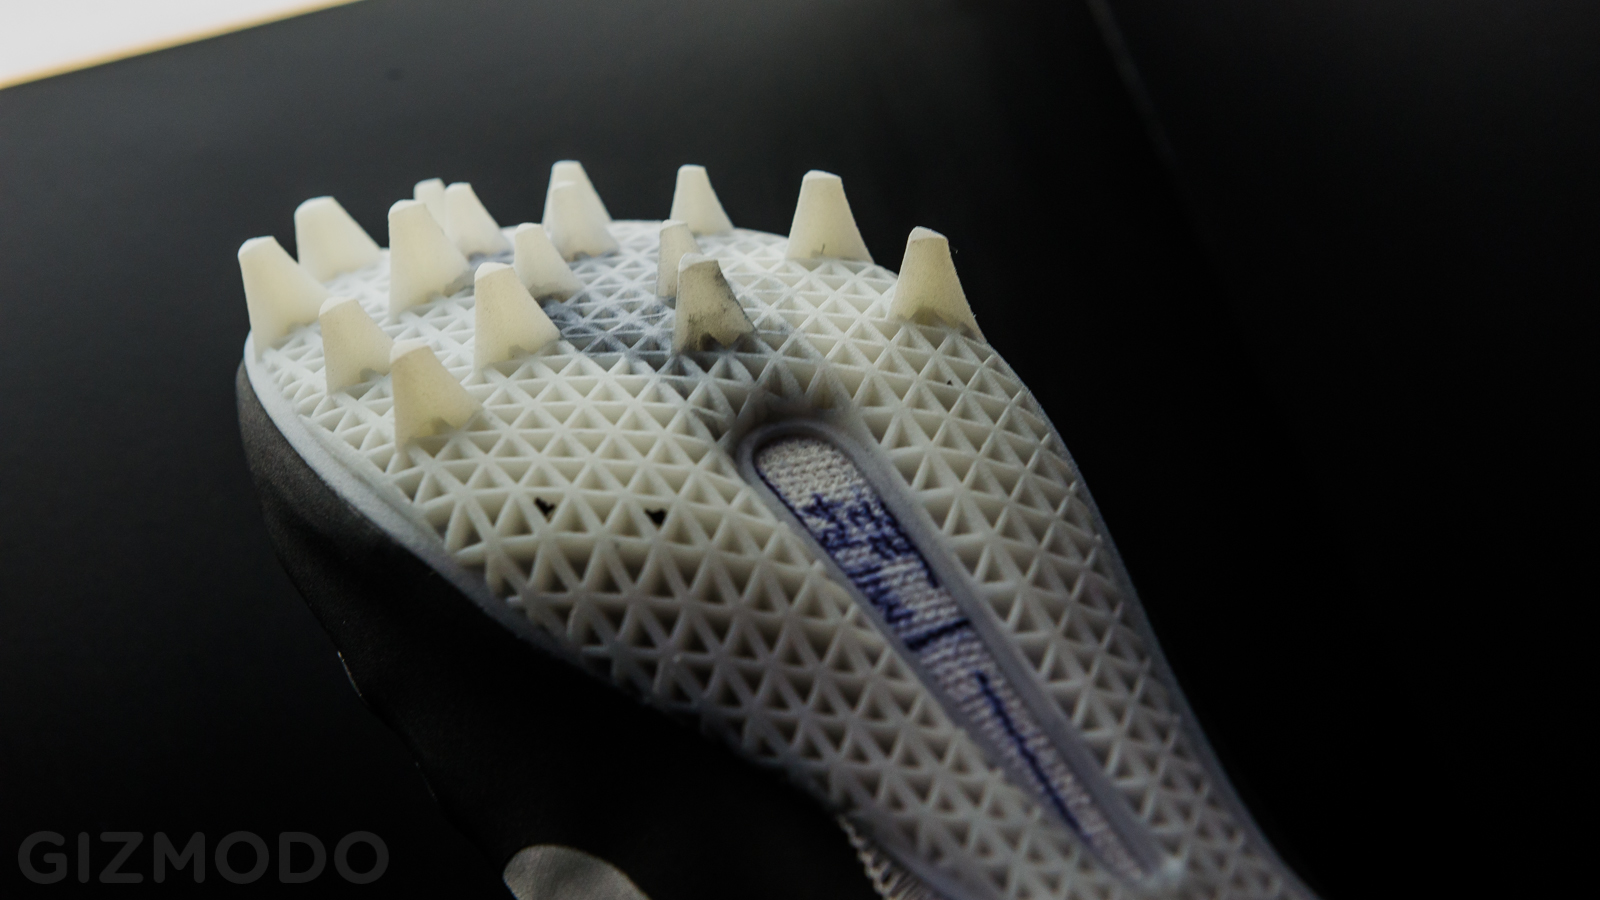 How 3D Printing Supercharged Nike’s New Super Bowl Cleat